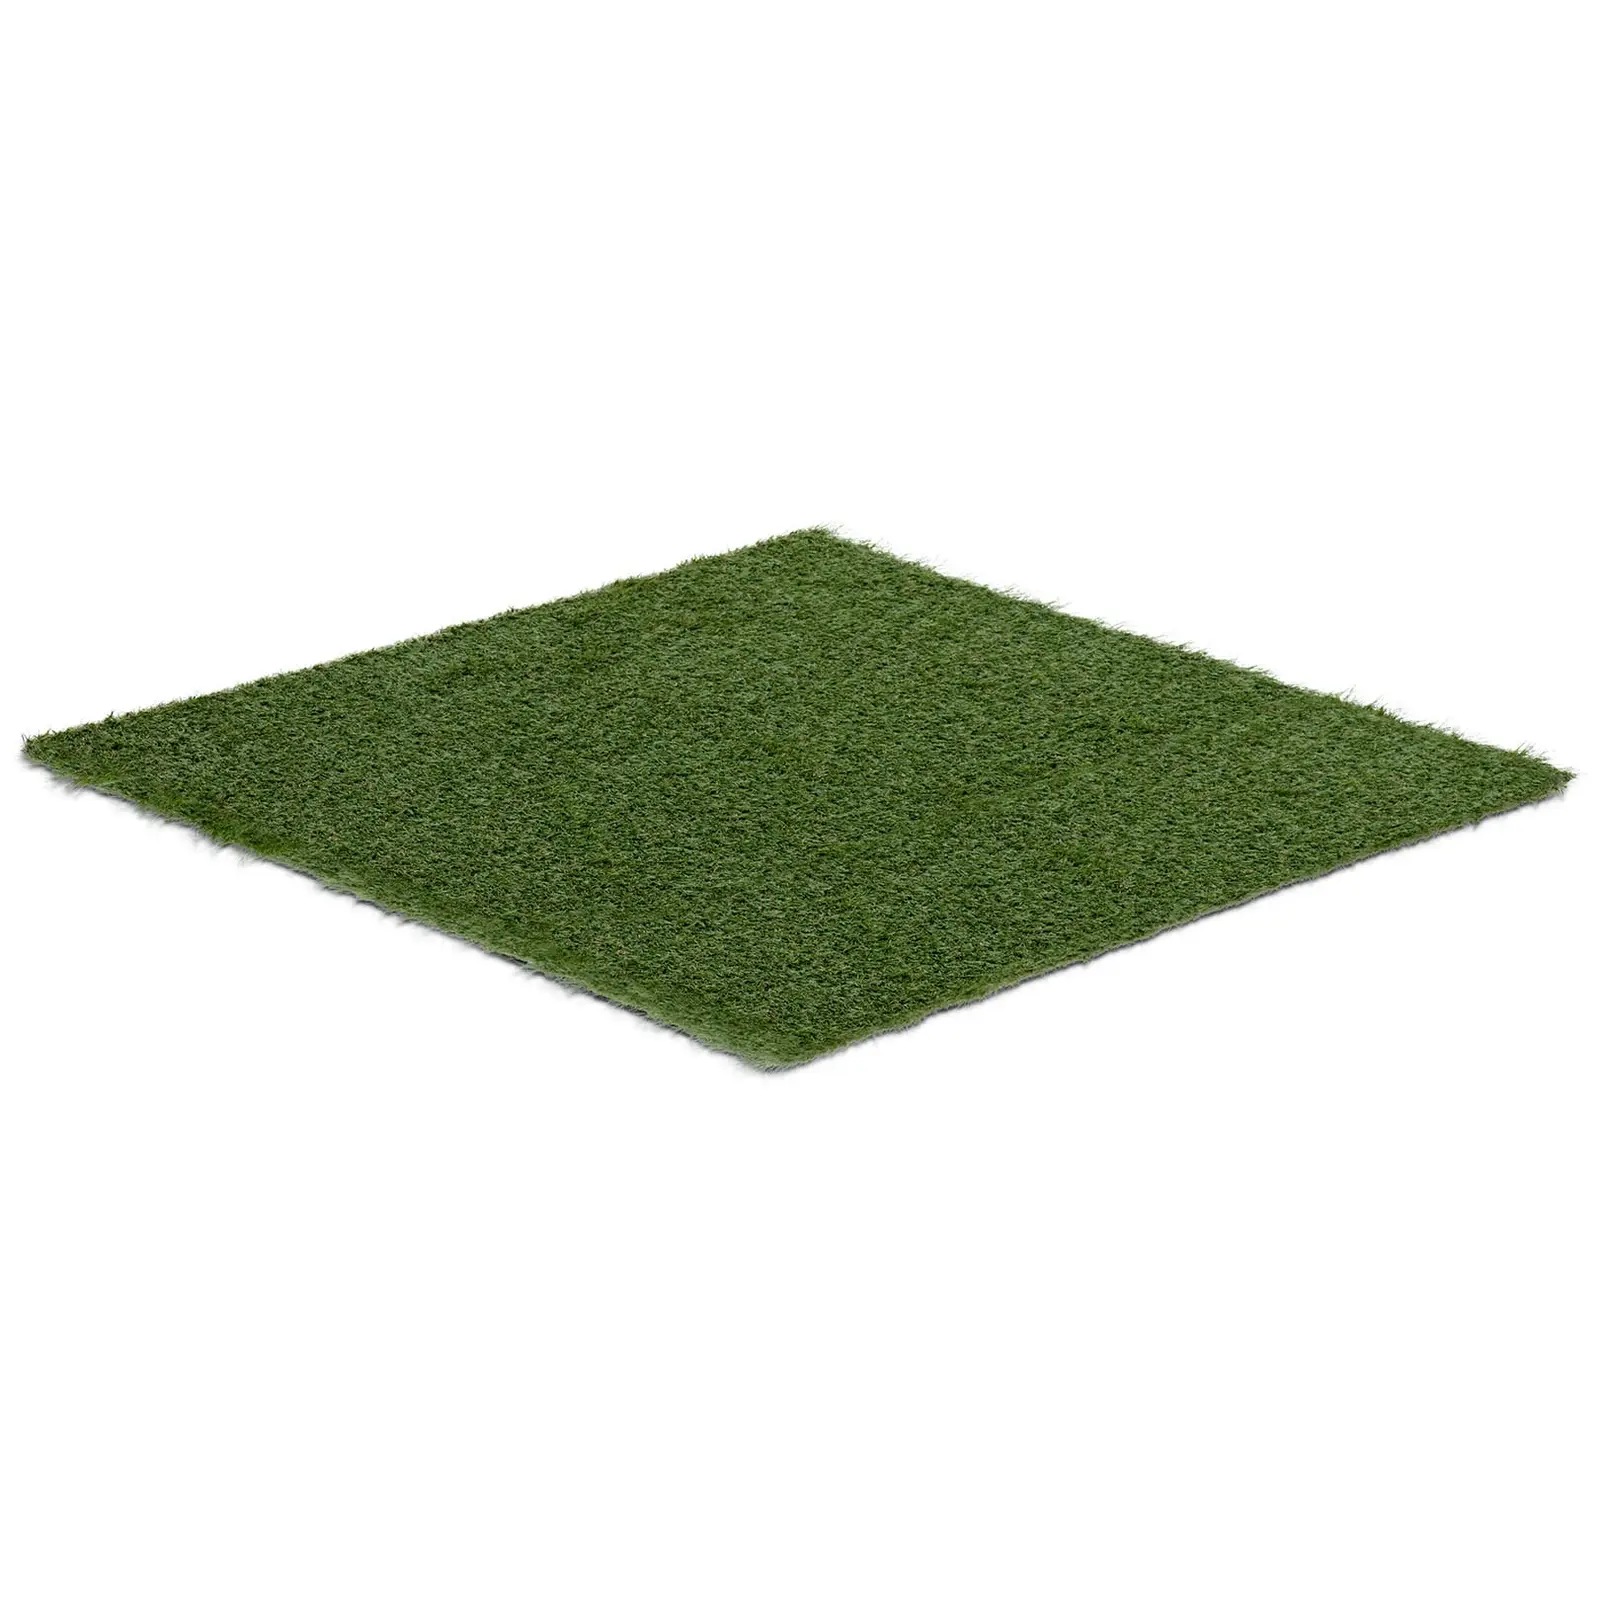 Artificial grass - 100 x 100 cm - Height: 30 mm - Stitch rate: 14/10 cm - UV-resistant